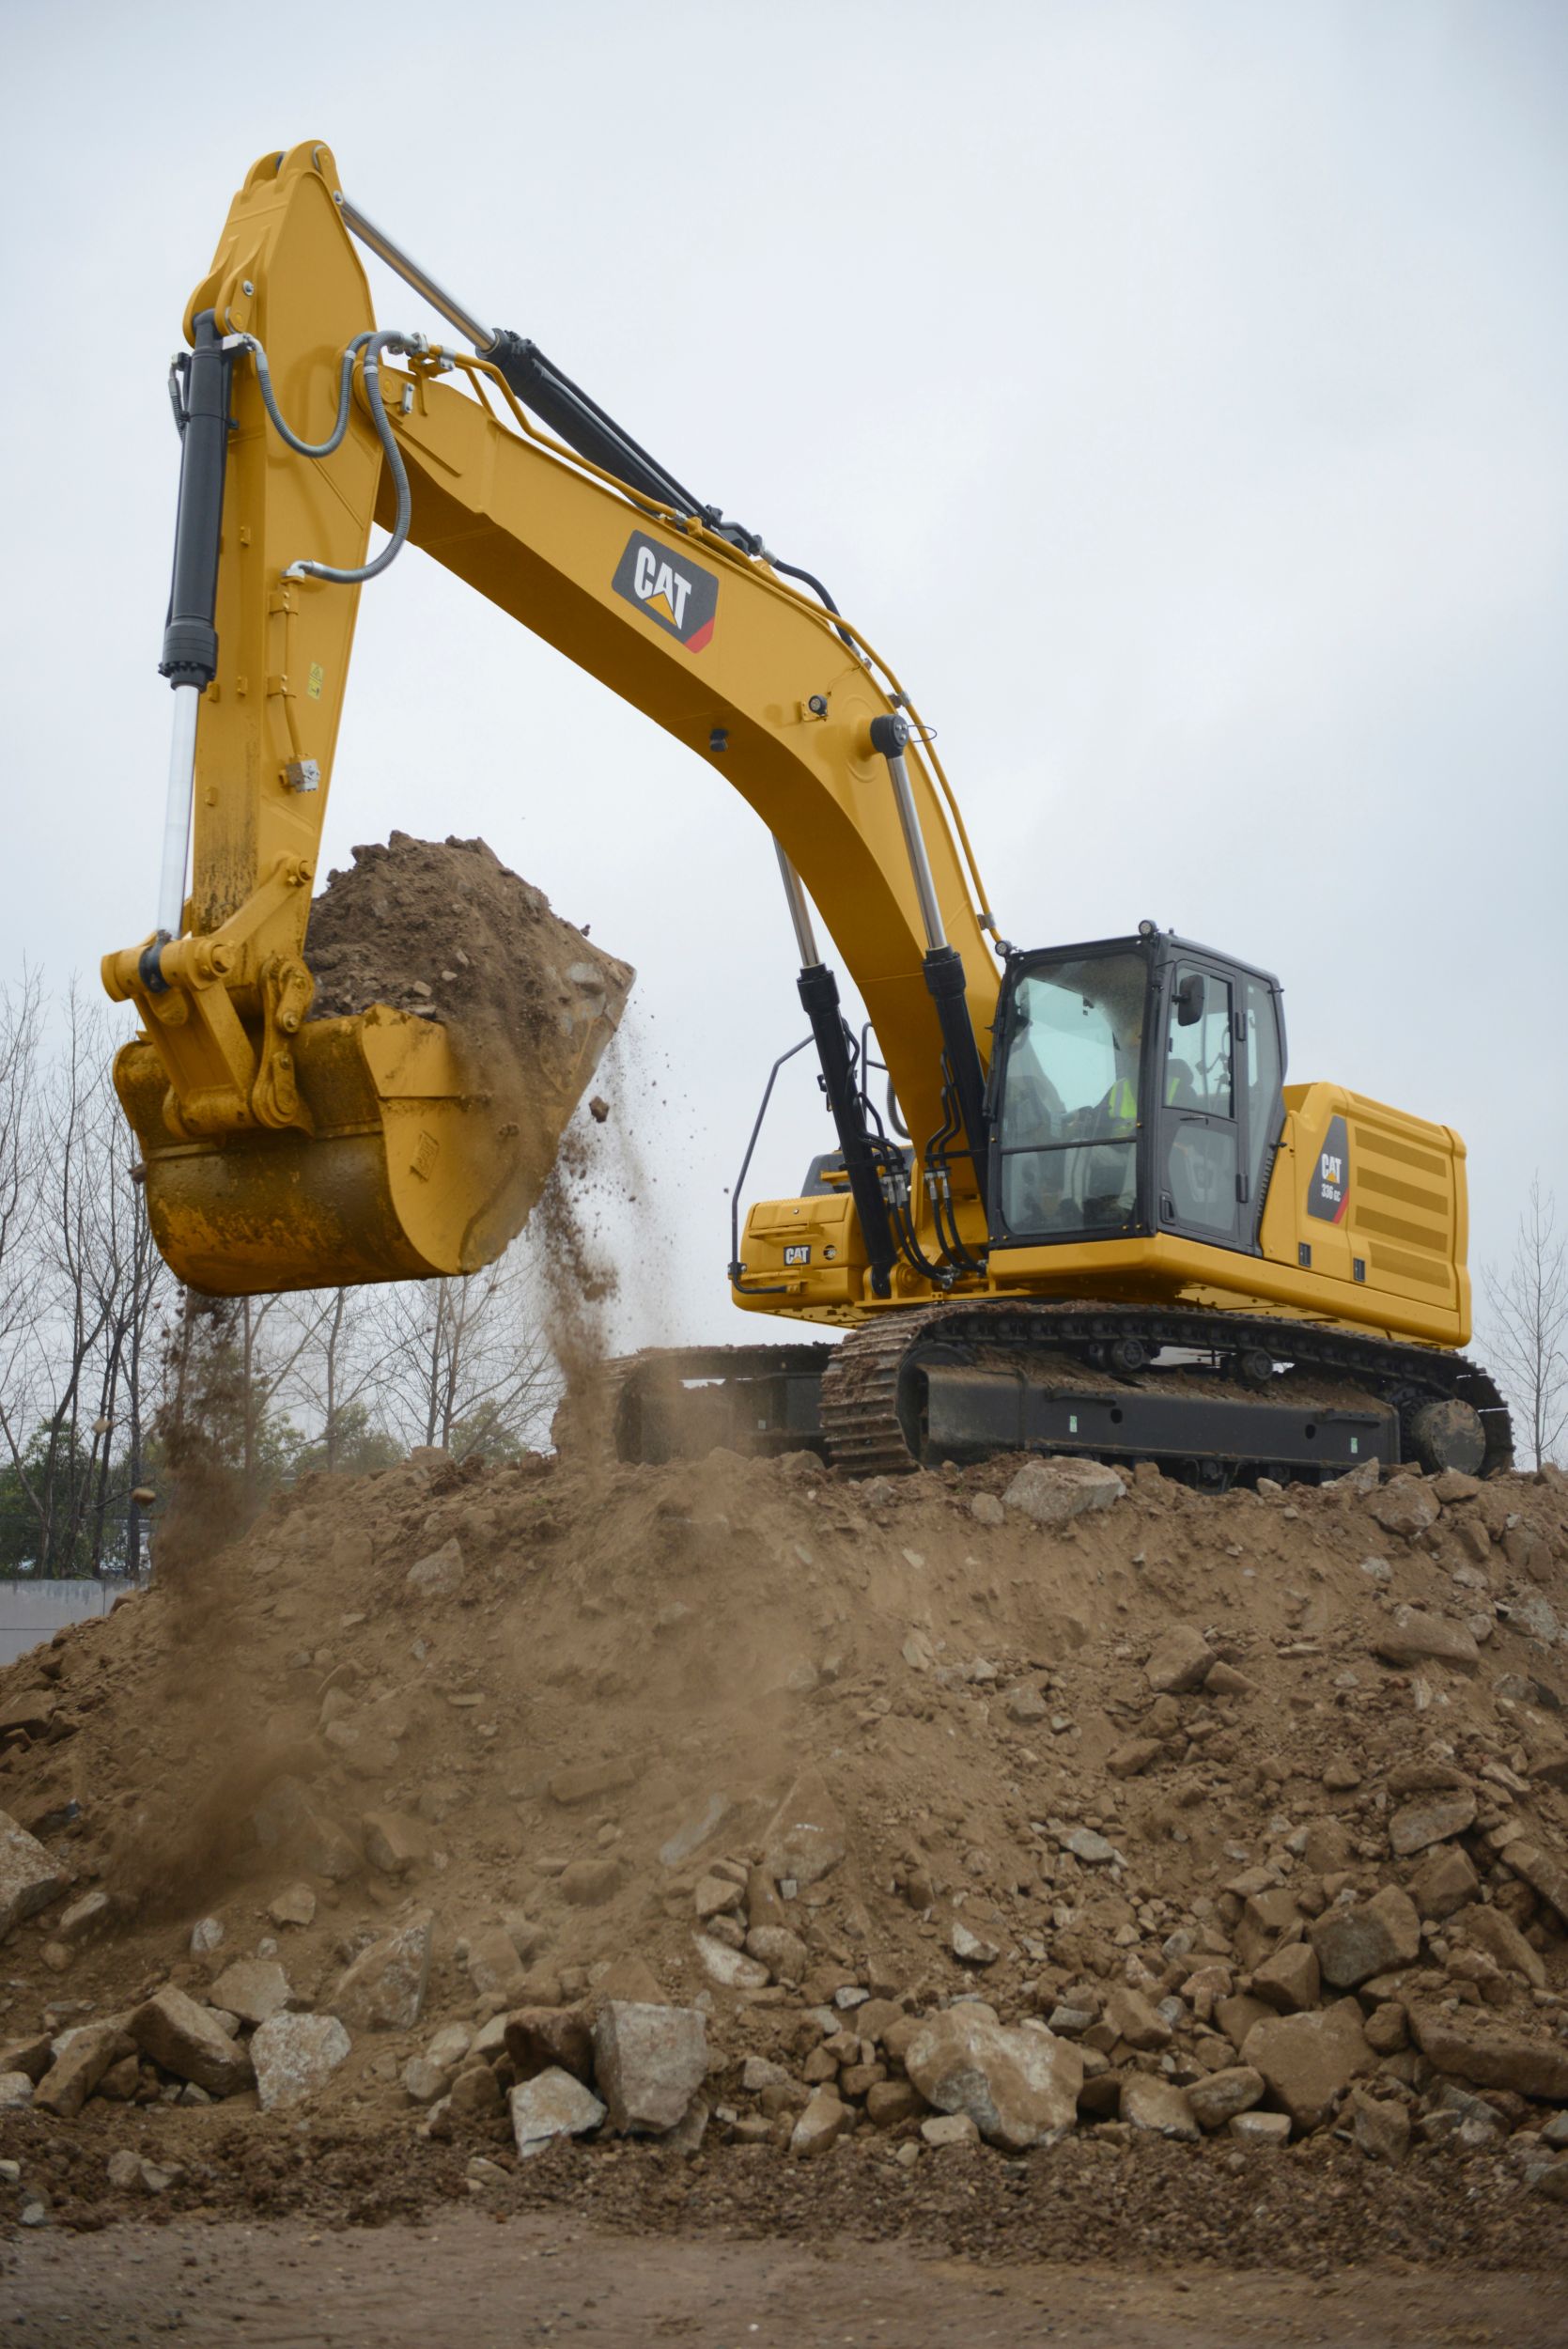 More than 40 different Cat attachments make the 336 GC a versatile performer.